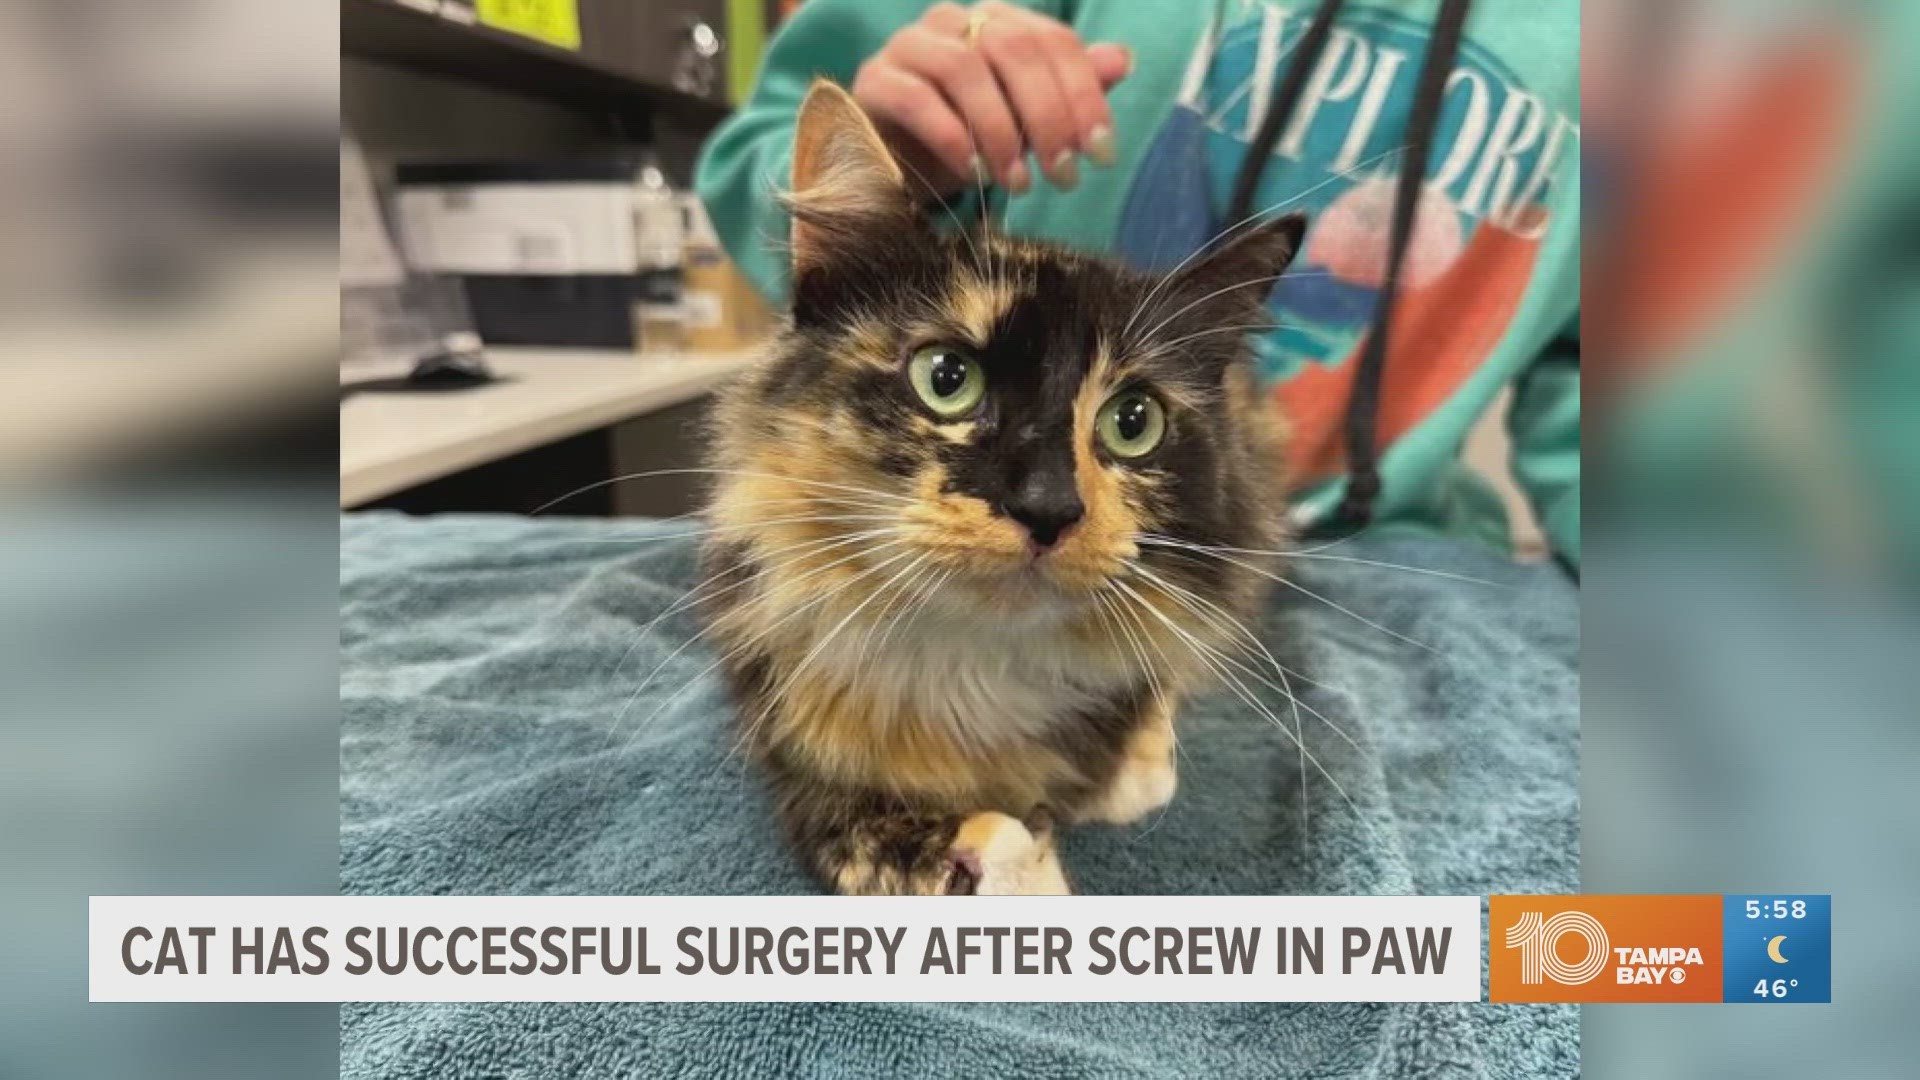 The cat, named Daisy, underwent a successful surgery to remove the screw.